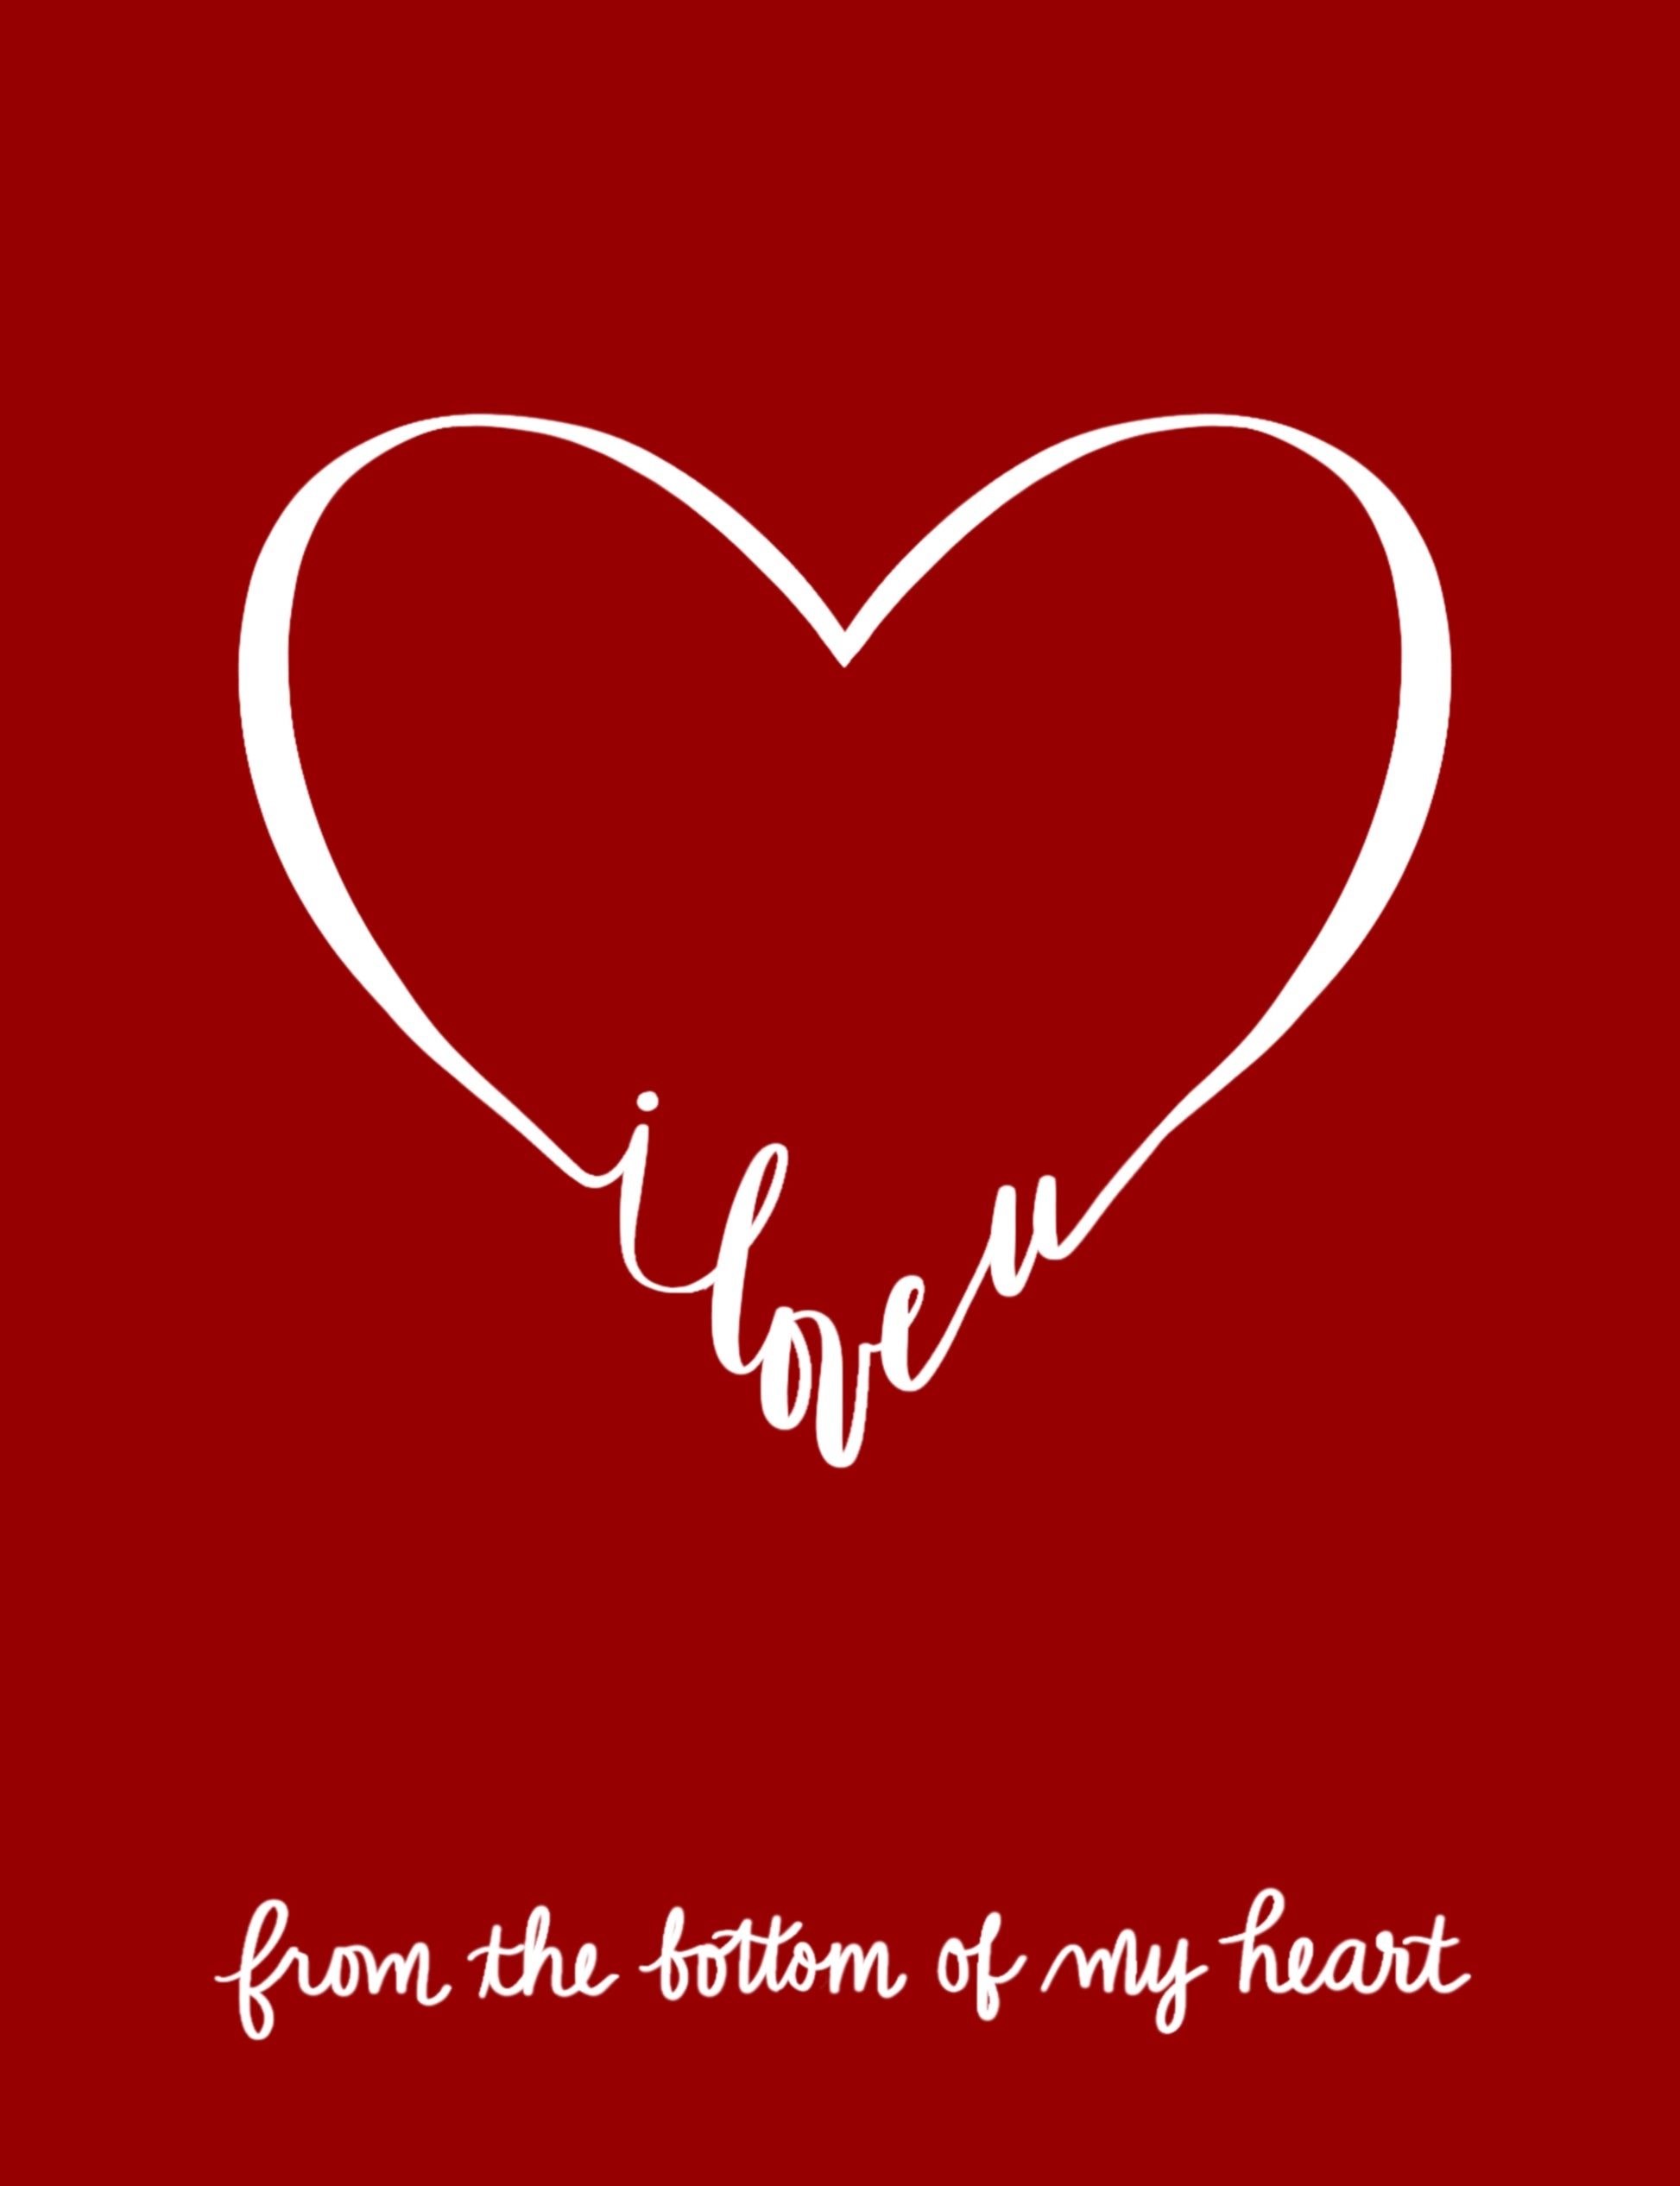 "I Love You From the Bottom of My Heart" is one of our best selling greeting cards and features an elegant hand-drawn heart with the text "I love u" forming the "V" of the bottom of the heart.  The image is featured on a vivid red background and the words "from the bottom of my heart" are printed in messy handwriting below.  All of our original artwork is created by Jennifer Knight.  Newwingstudio.com